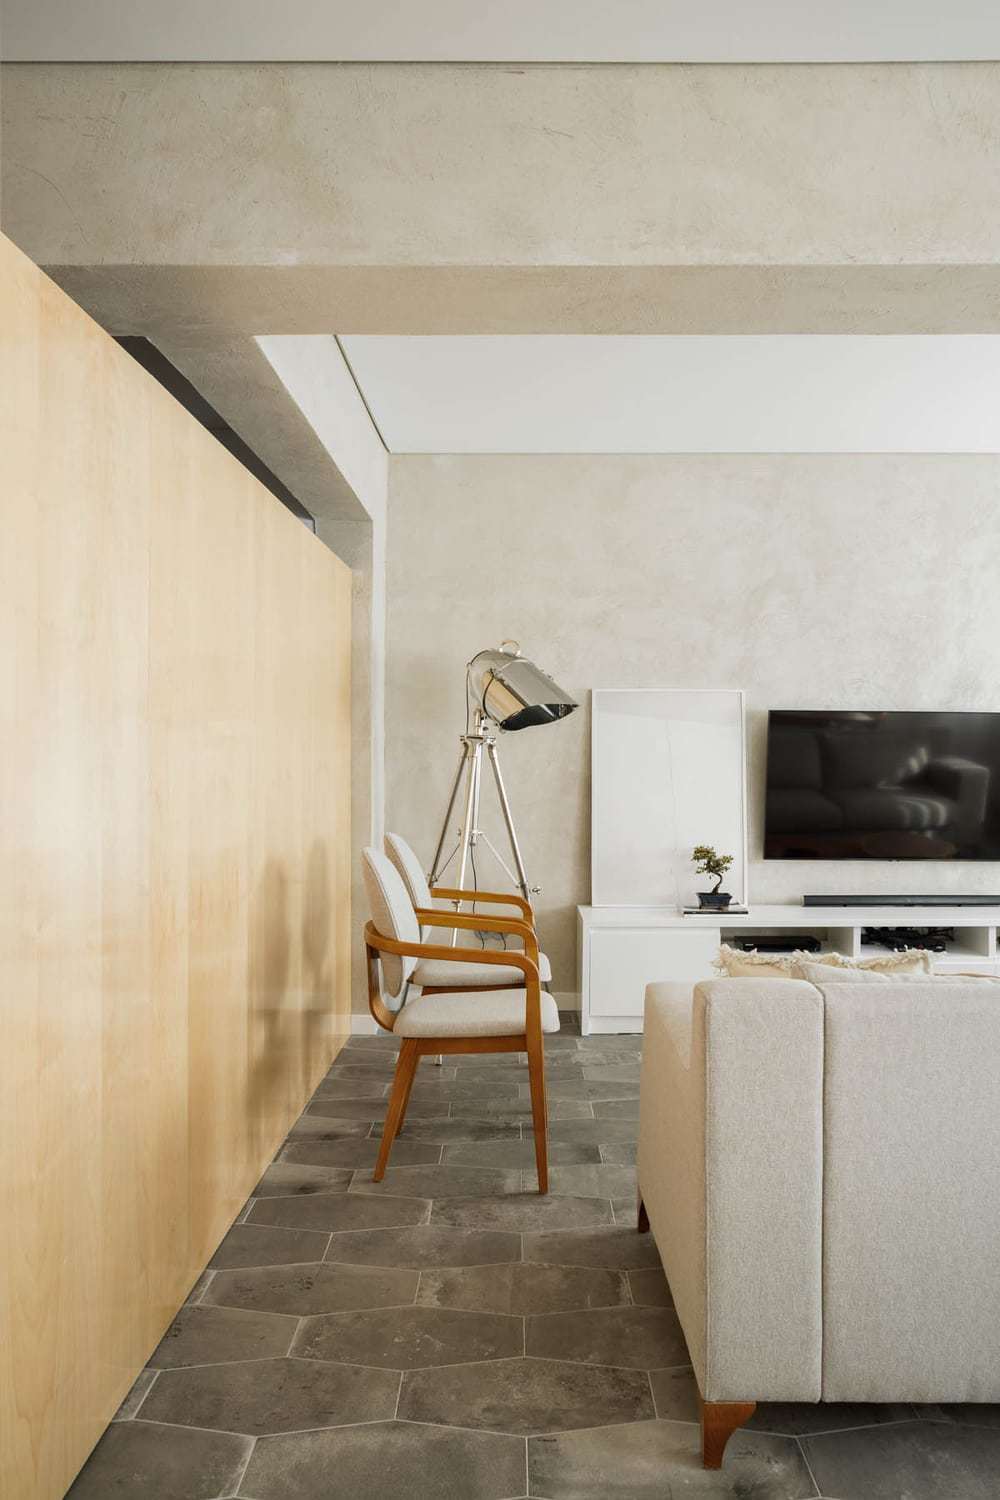 Apartment Rehabilitation During the COVID-19 Pandemic by the Atelier Paulo Moreira Architecture